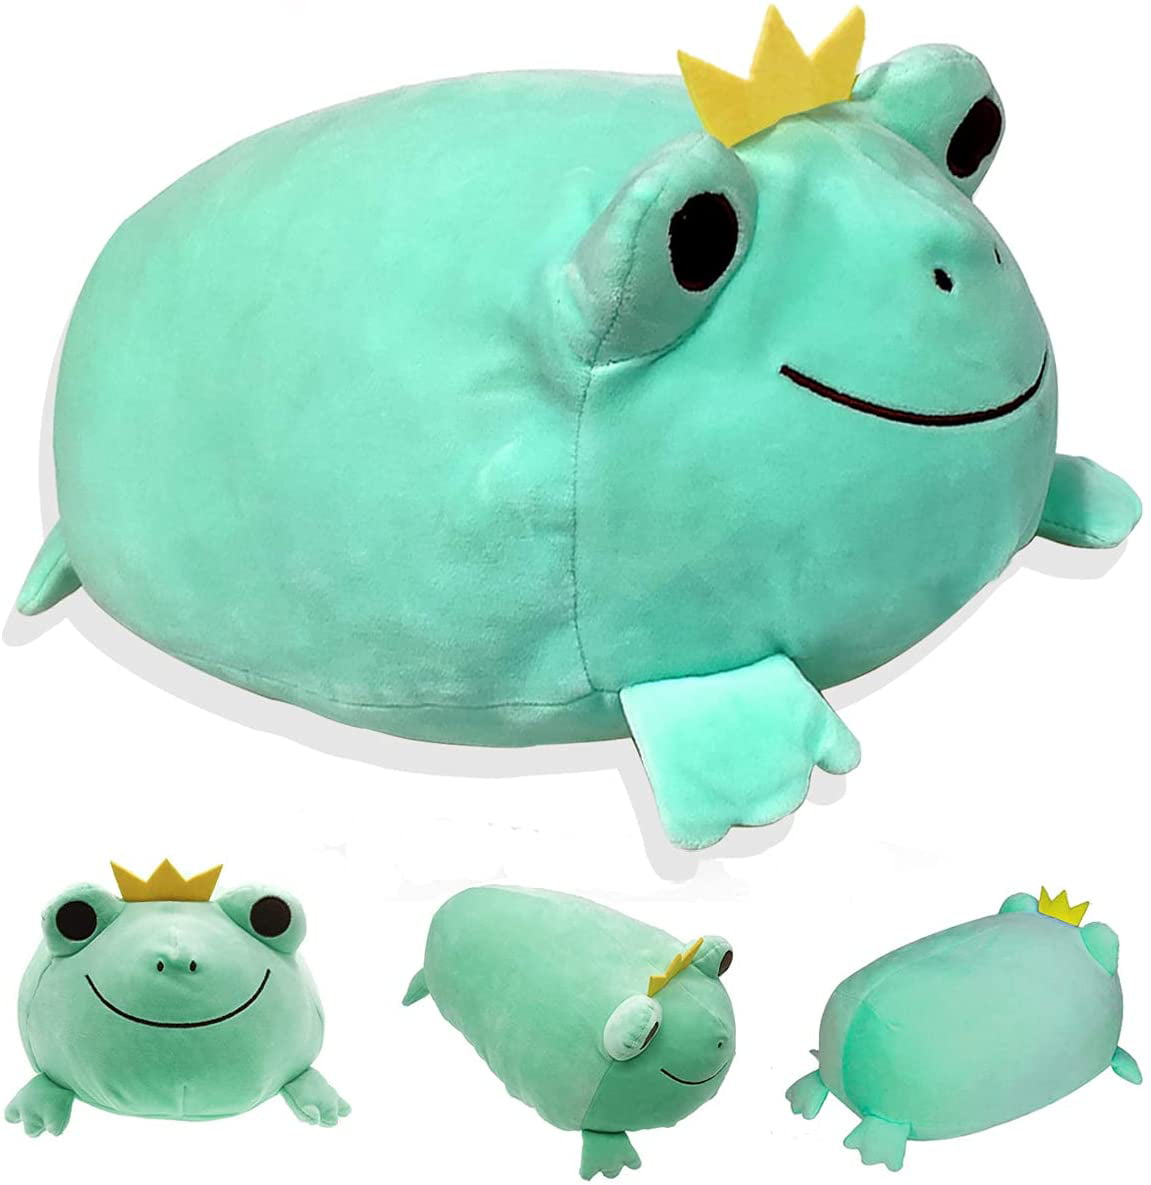 ROCHEMON Cute Frog Plush Stuffed Animal,Soft Frog Plushie Hugging Pillow Frog Plushie Toy Gift for Kids Toddlers Grils Boys Children Green Frog 14 inch 